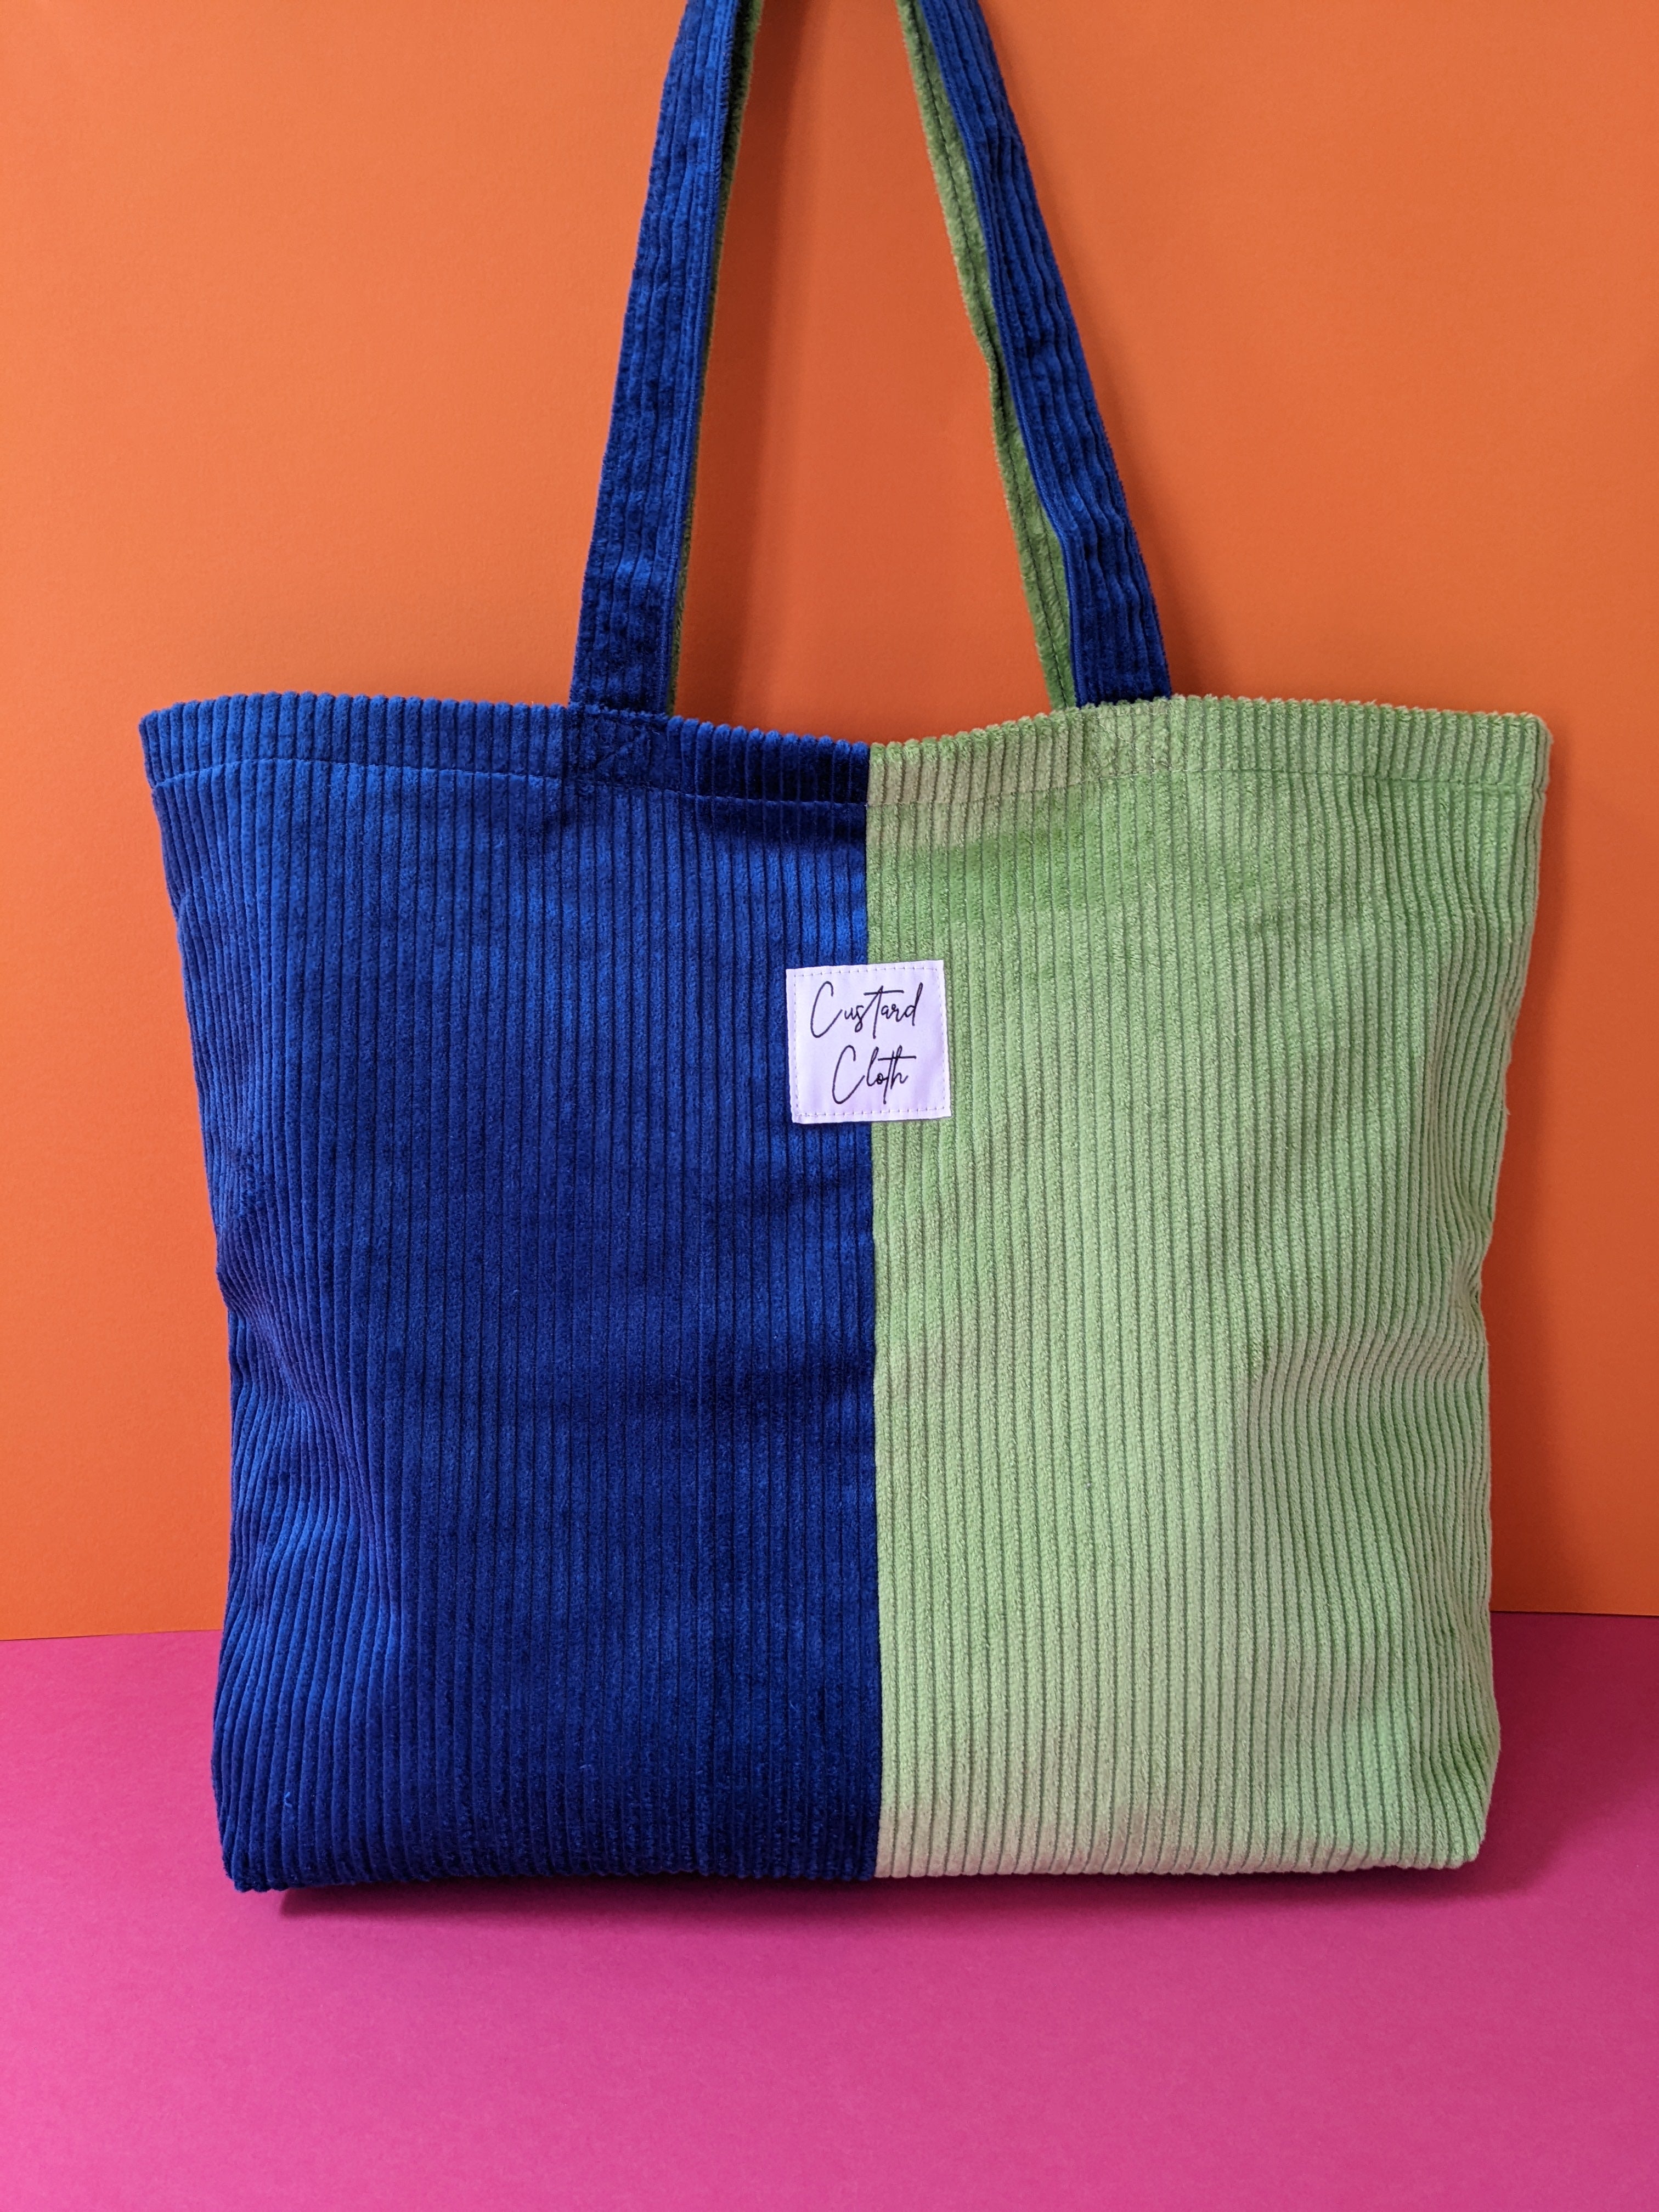 Blue and Green Cord Weekend Tote Bag